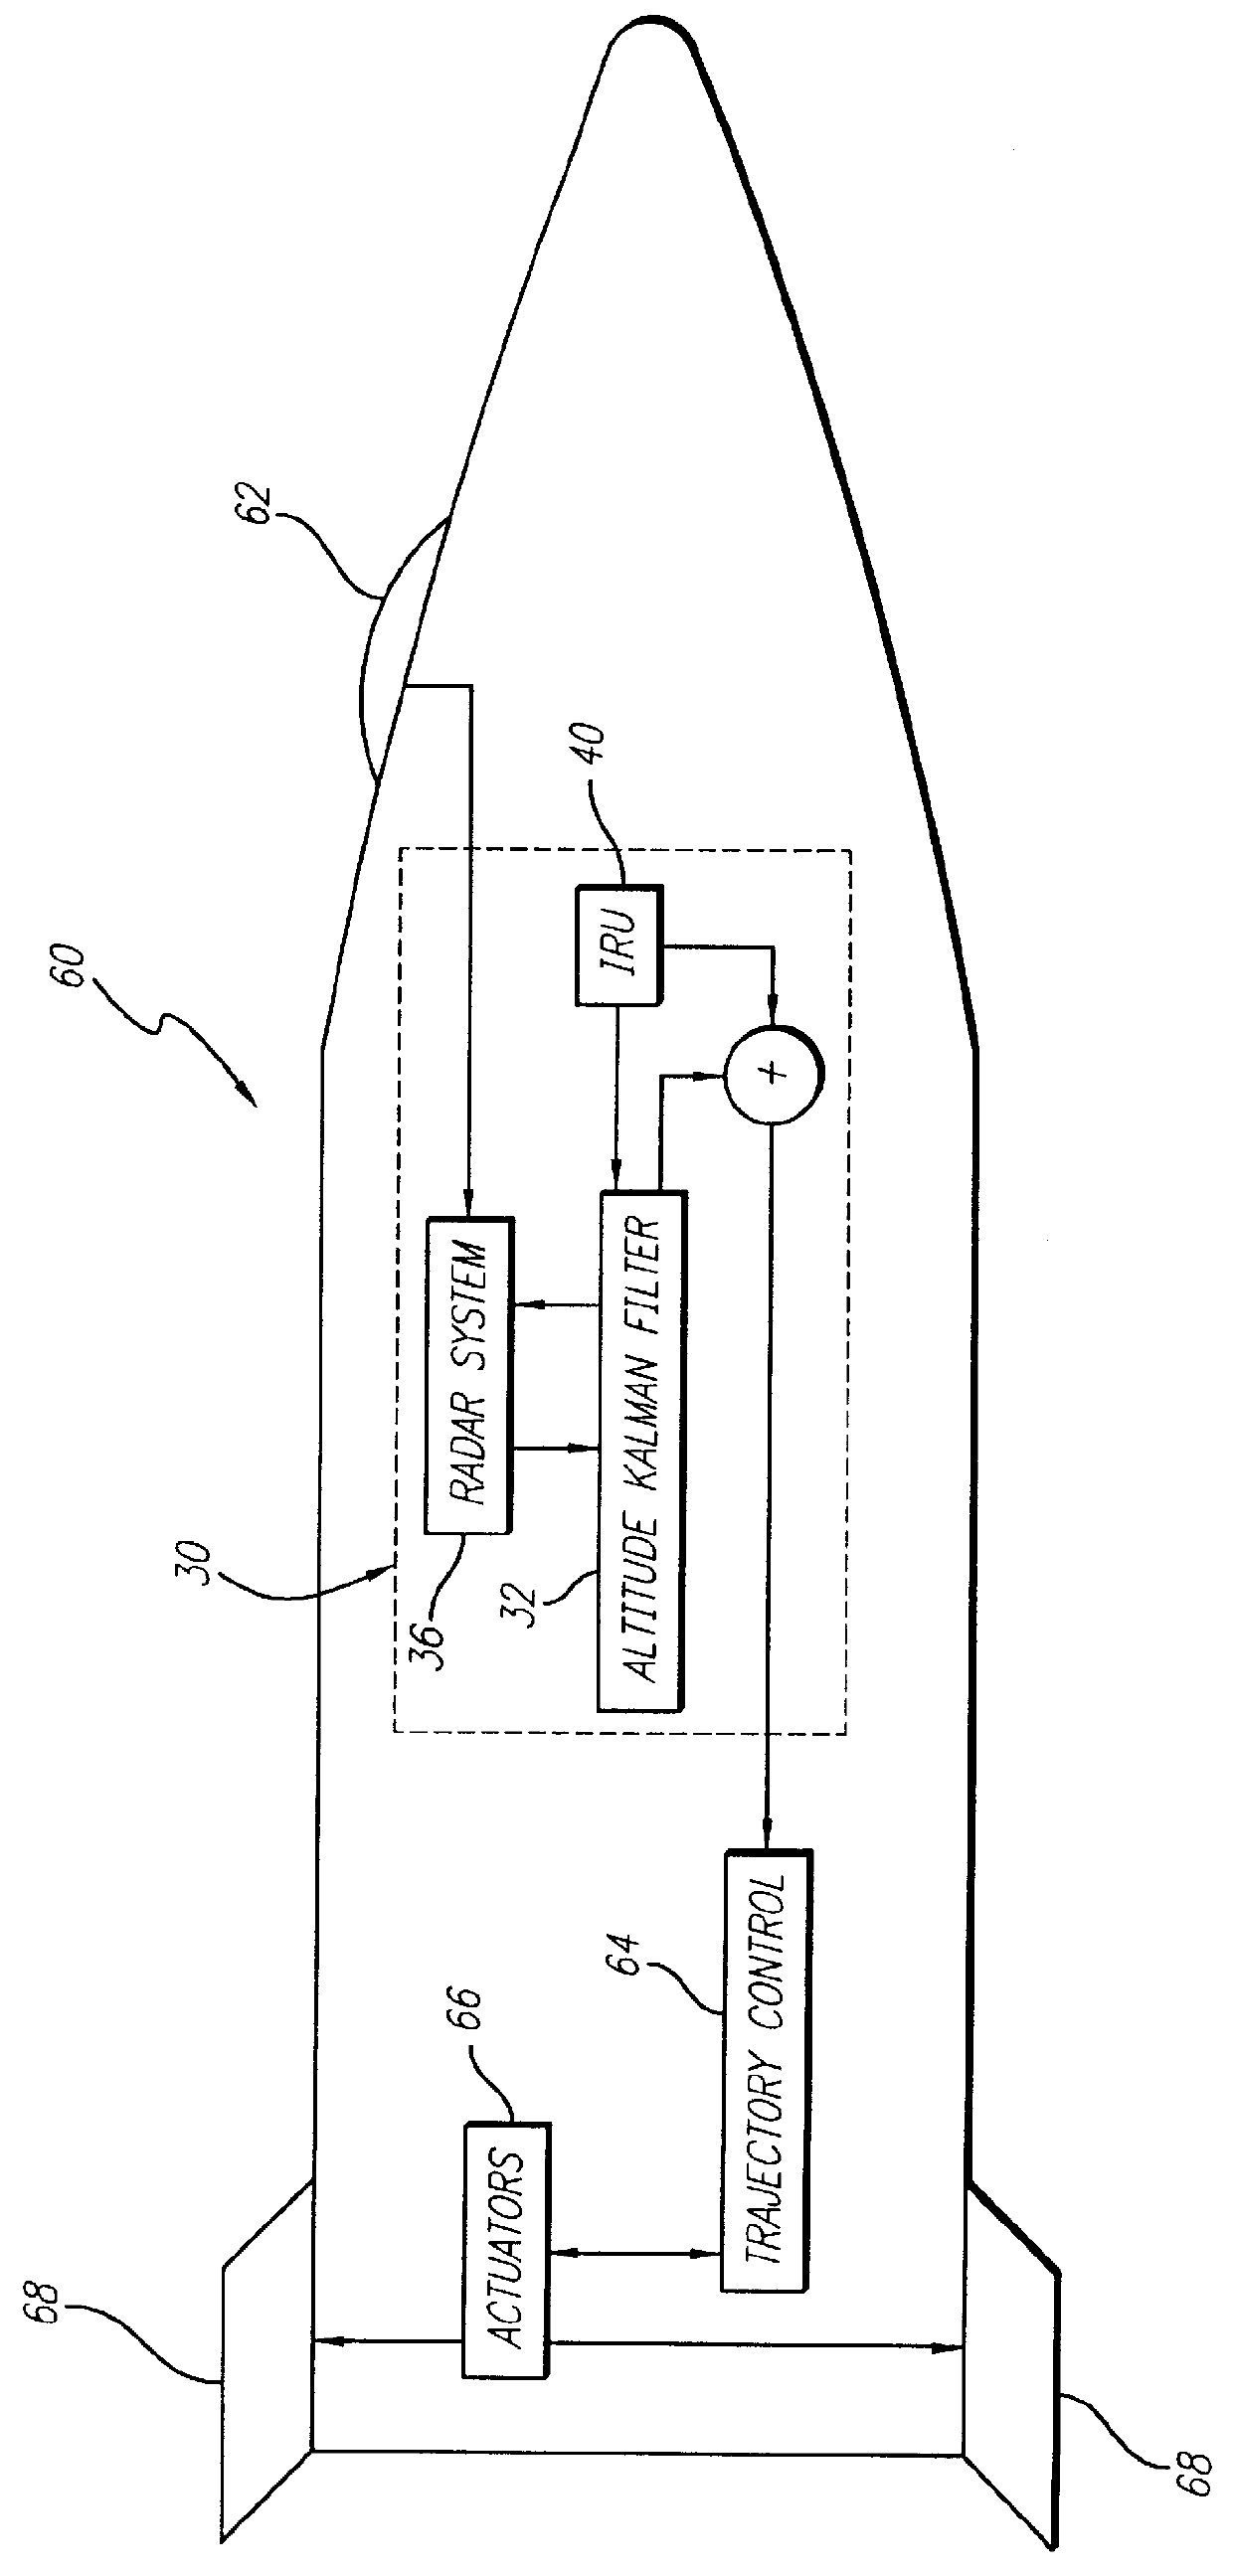 System for accurately determining missile vertical velocity and altitude